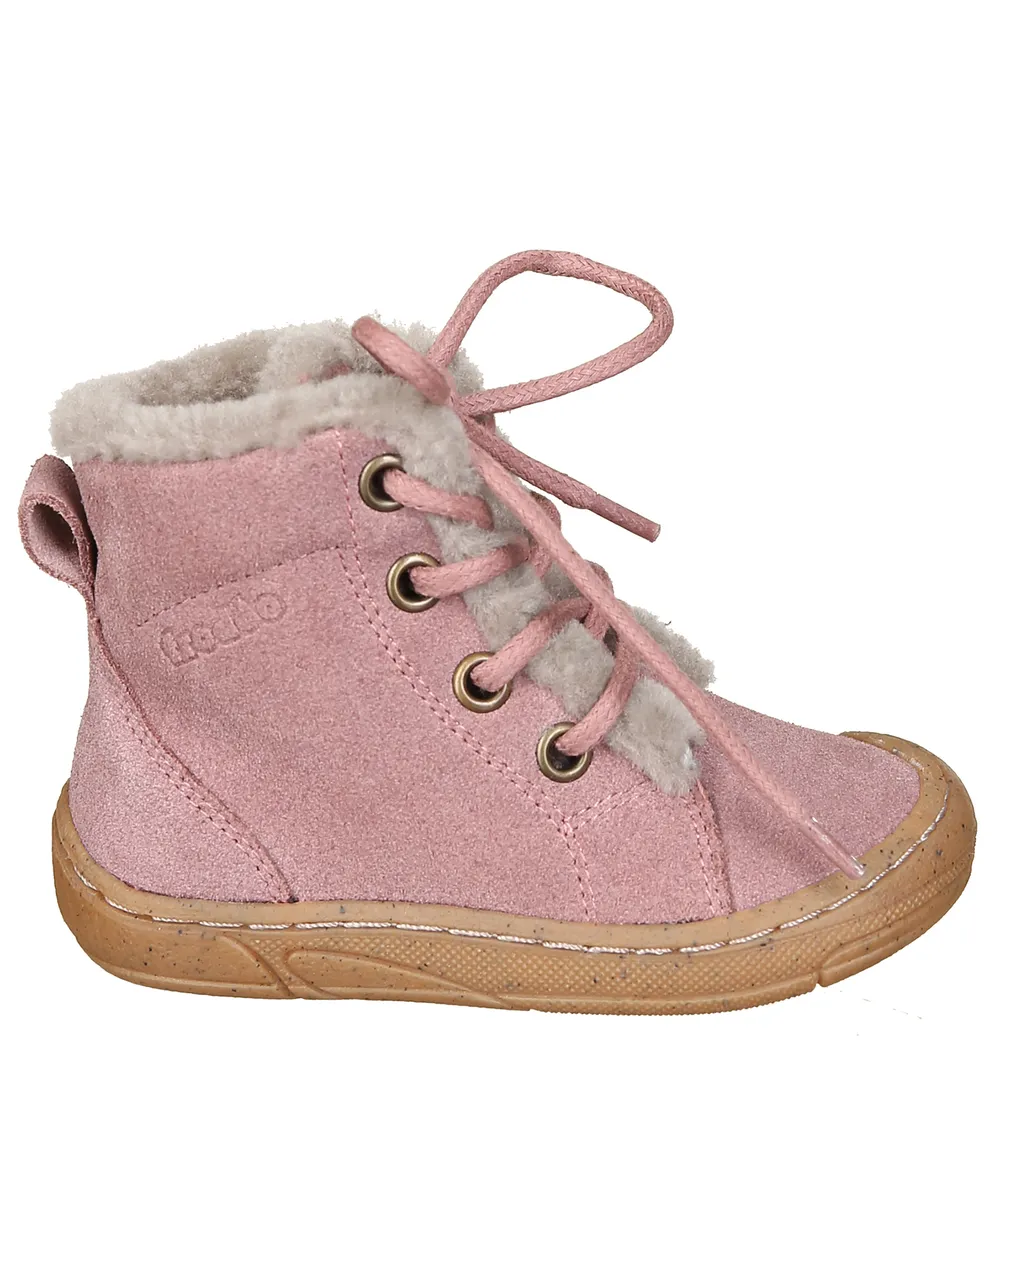 Winter-Booties MINNI SUEDE in pink